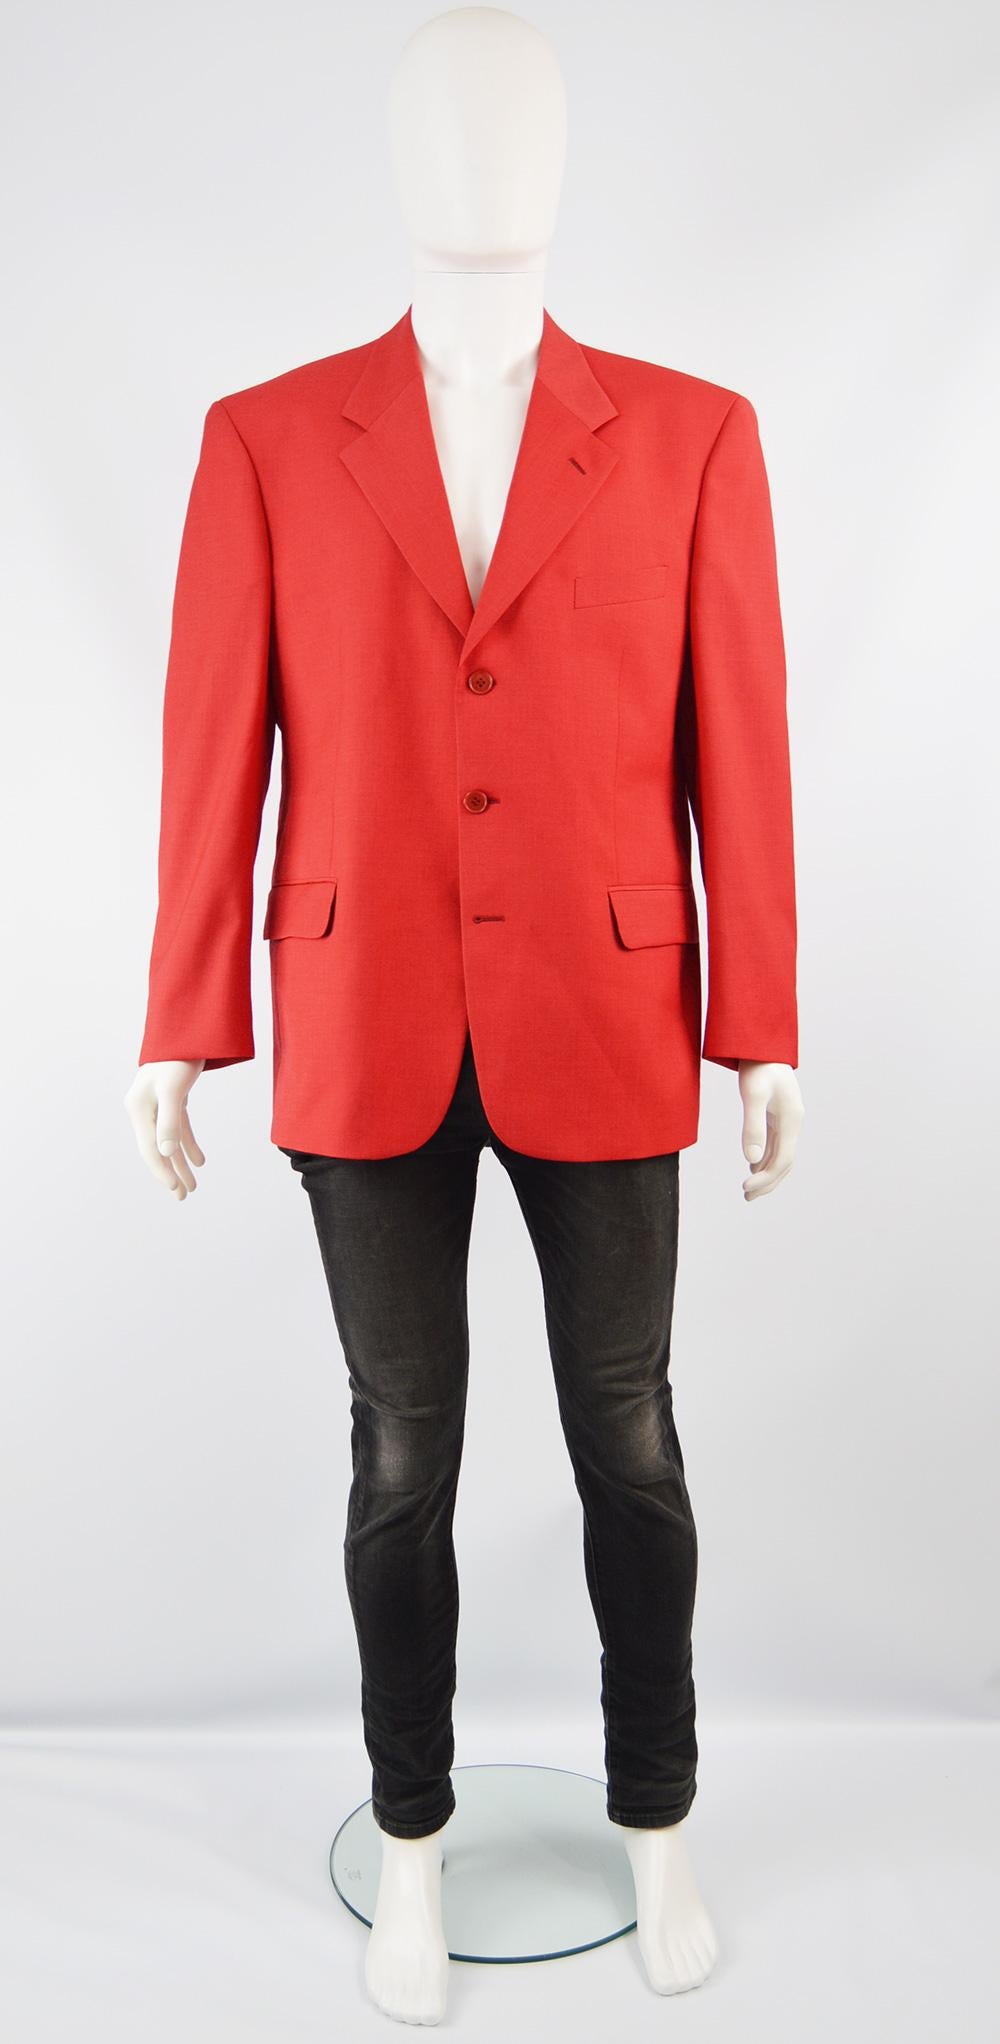 A bold yet classic vintage men's blazer jacket from the 90s by iconic French fashion house, Louis Feraud. In a bright red, suiting style worsted wool which is quite lightweight. This jacket was originally sold at luxury British department store,